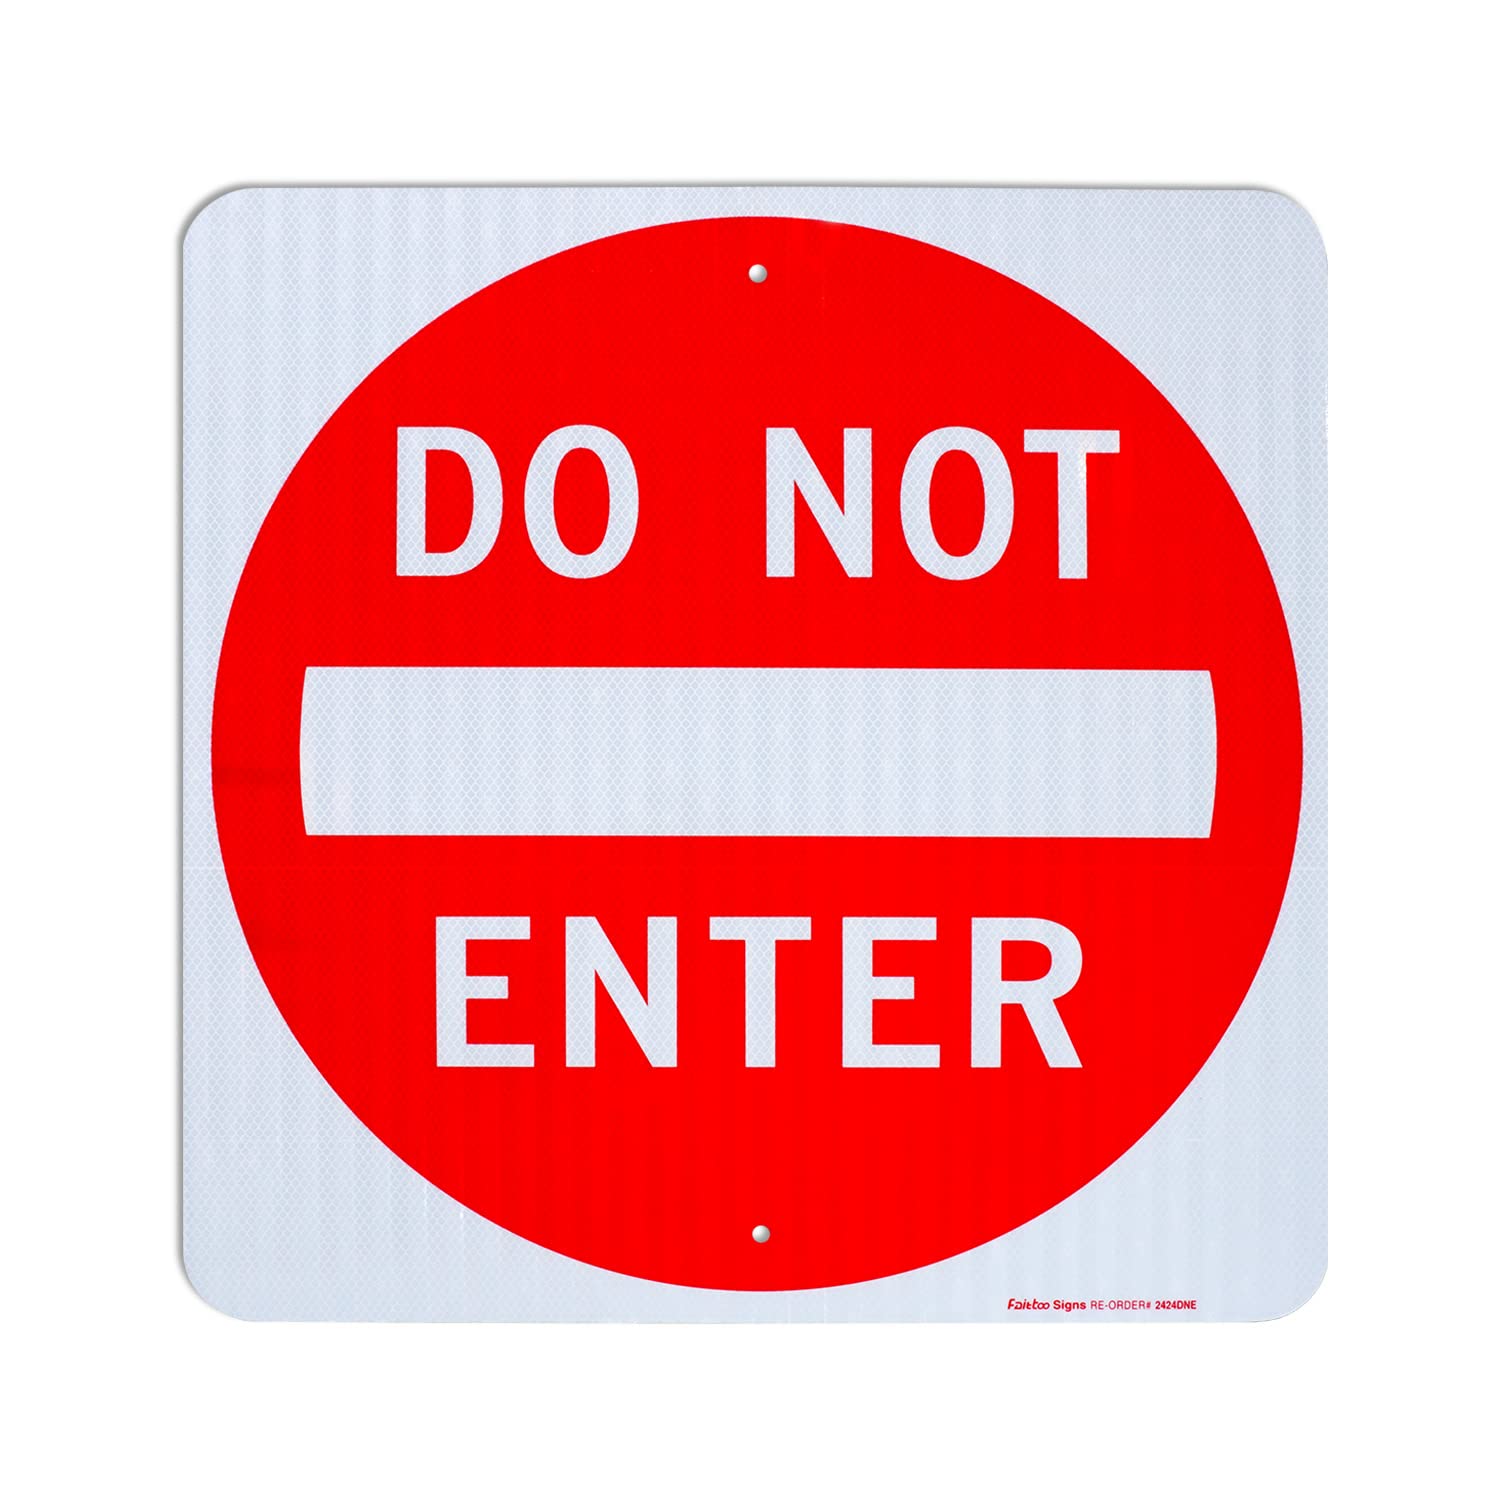 Do Not Enter Sign,12x12 Inch Square .040 Aluminum,Reflective Rust Free Metal Sign,Fade/ Weather Resistant,Easy to Mount,Indoor/Outdoor Use